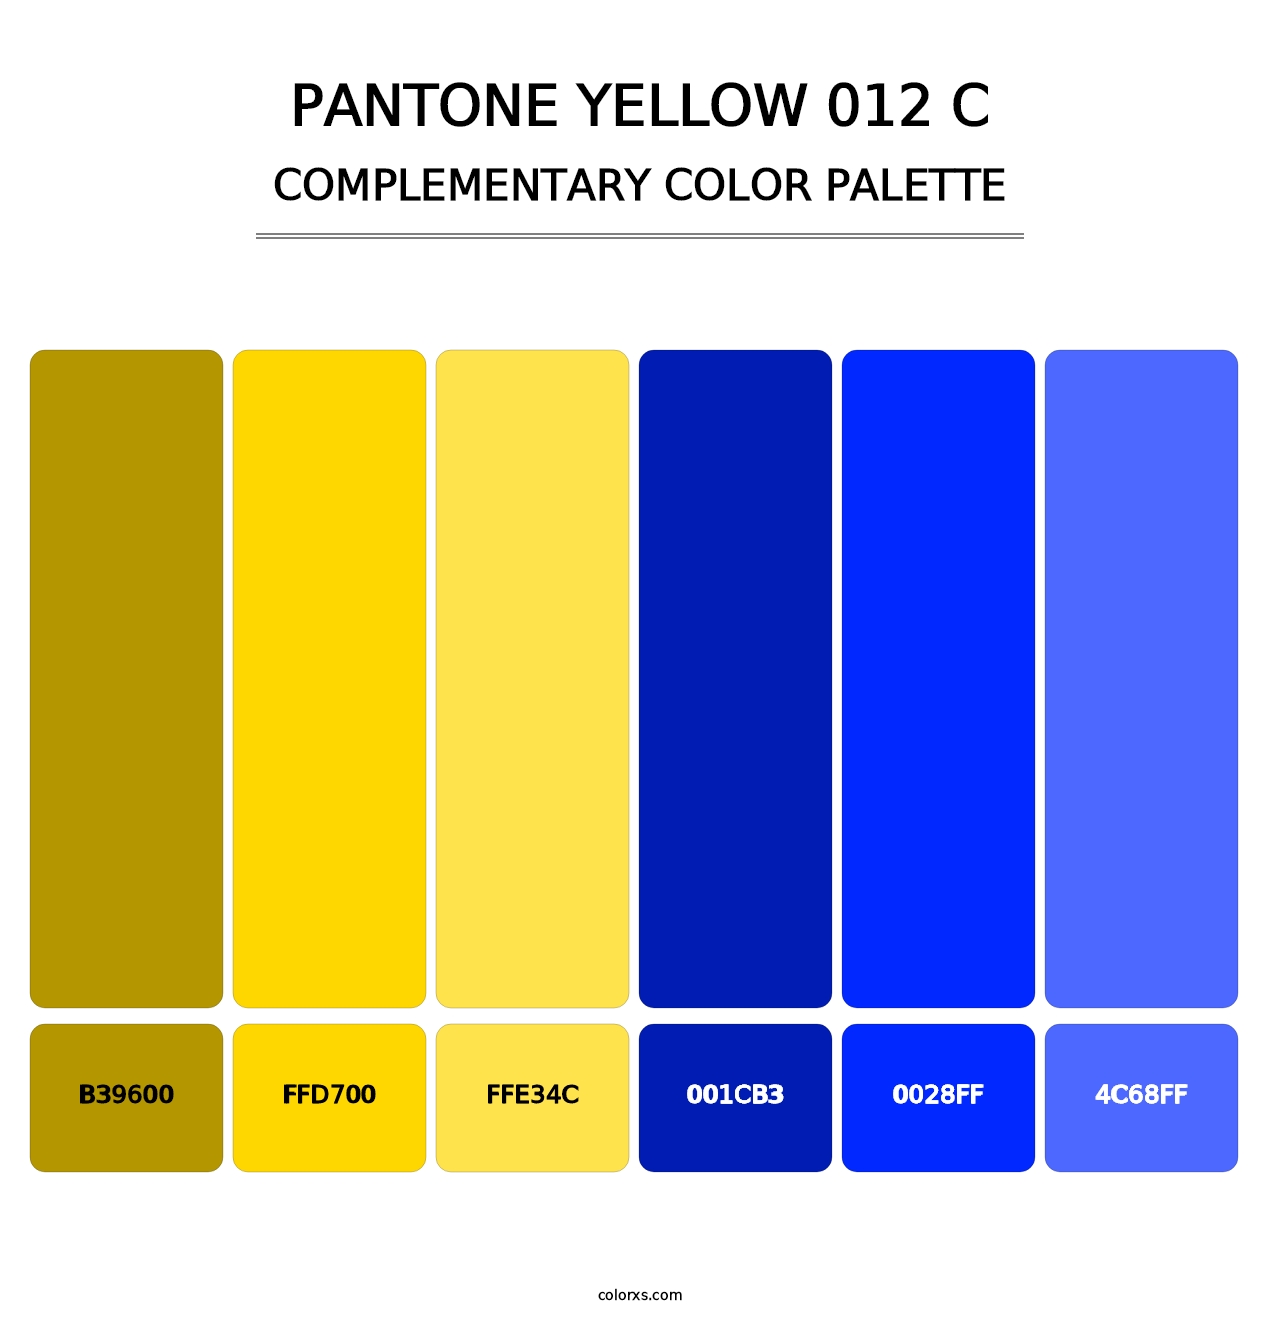 PANTONE Yellow 012 C - Complementary Color Palette